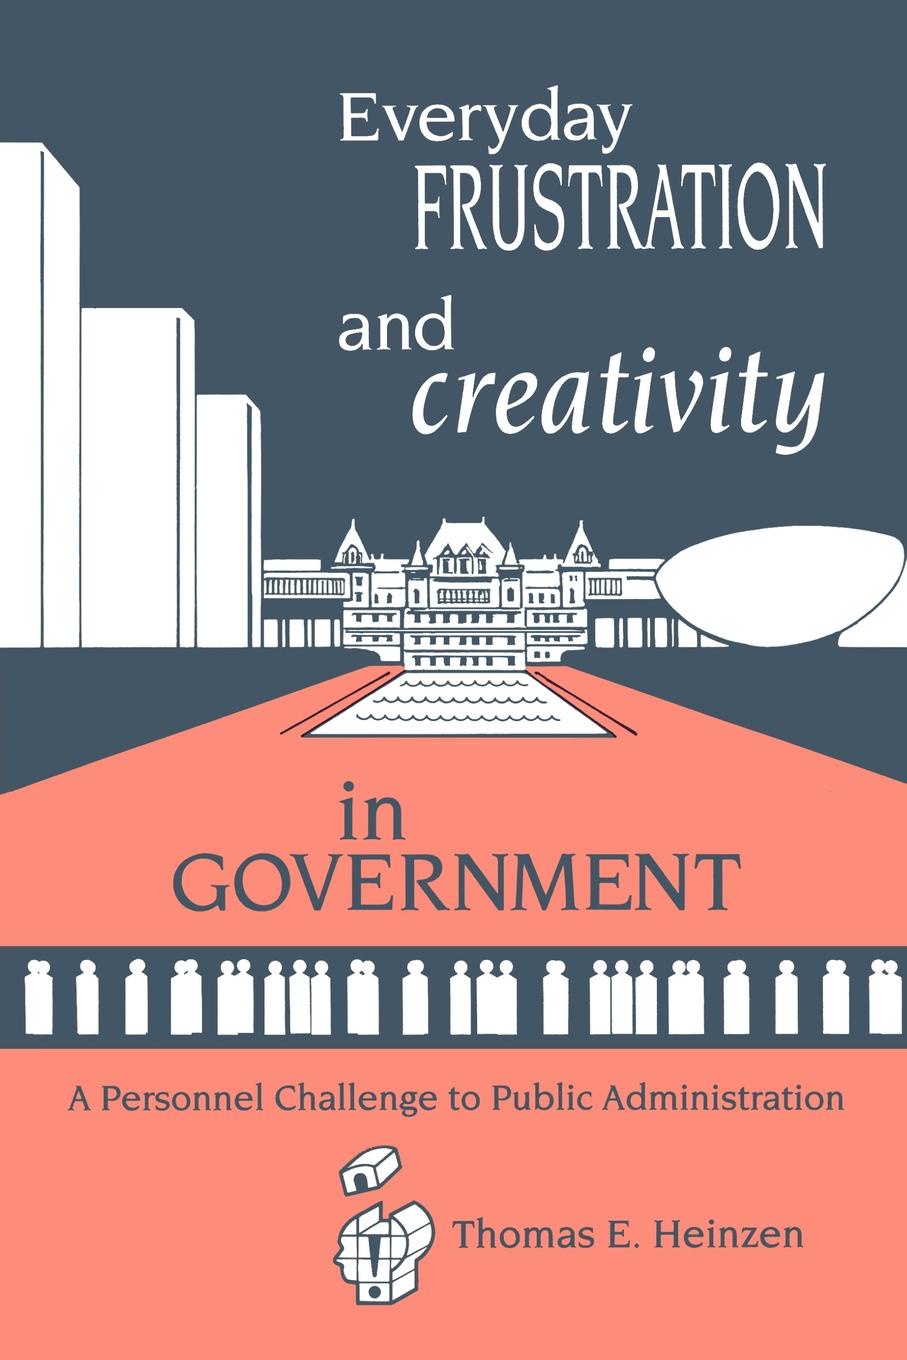 Everyday Frustration and Creativity in Government. A Personnel Challenge to Public Administration